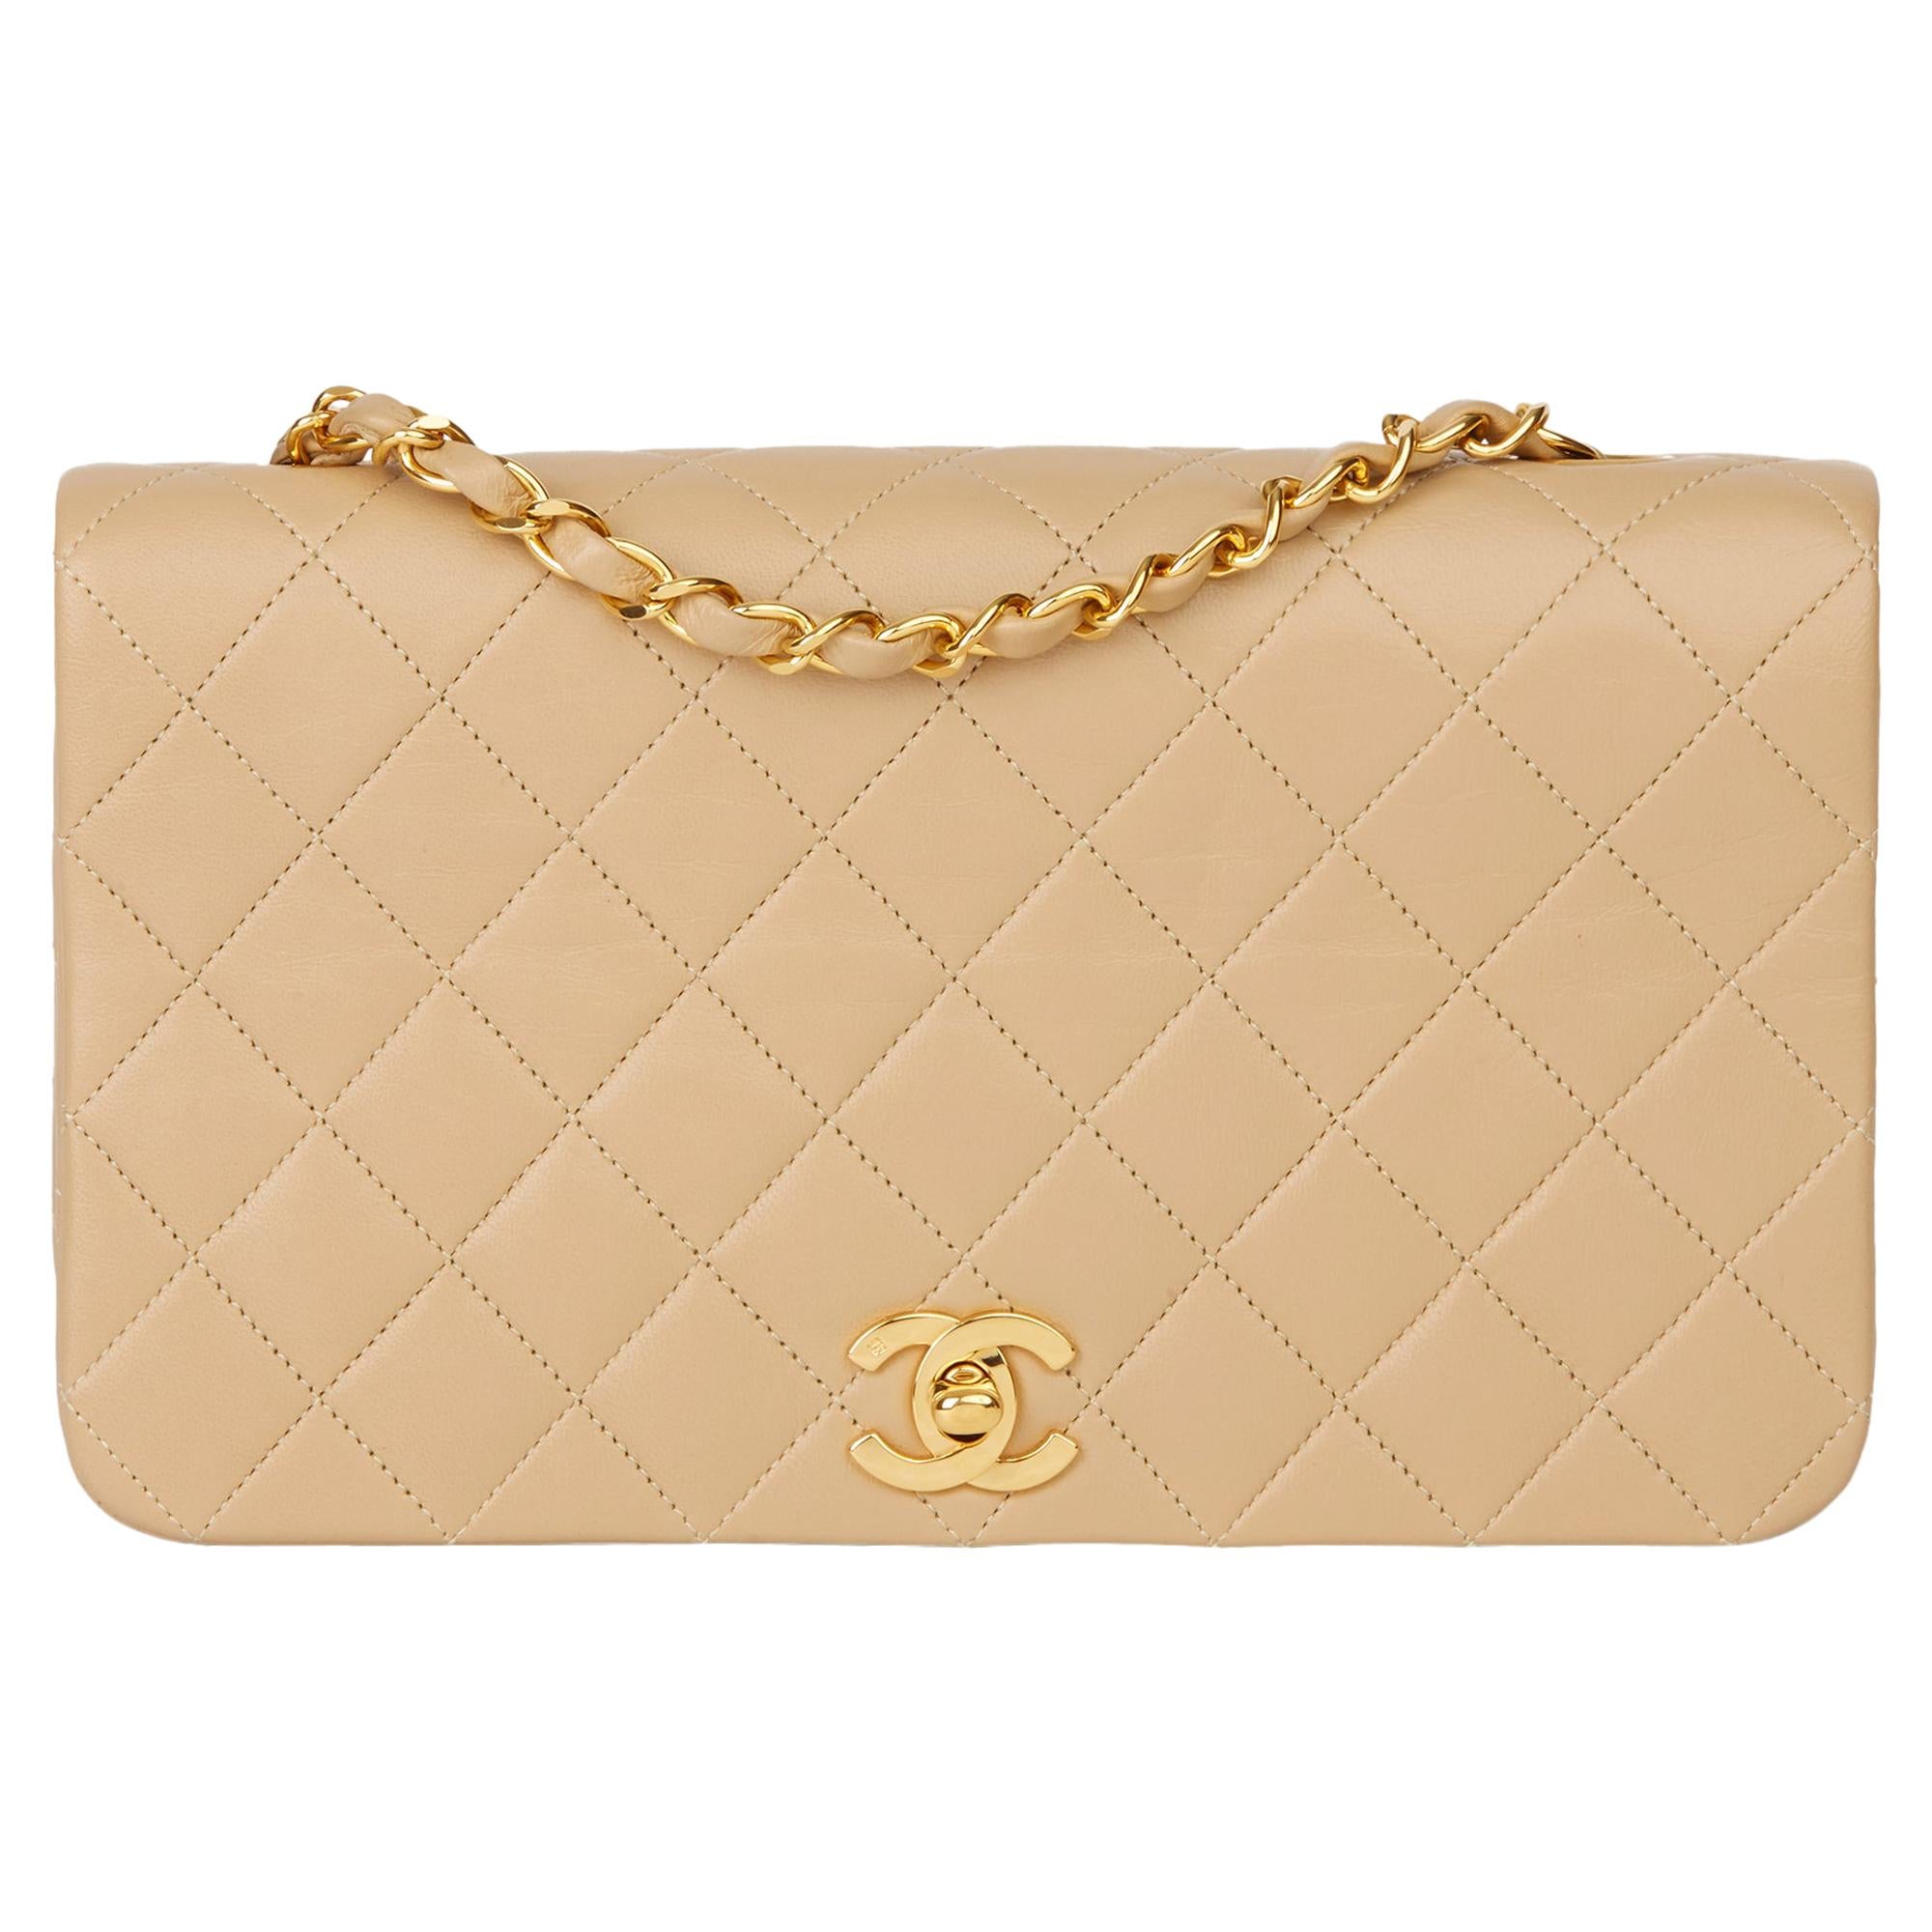 1991 Chanel Beige Quilted Lambskin Vintage Small Classic Single Full Flap Bag